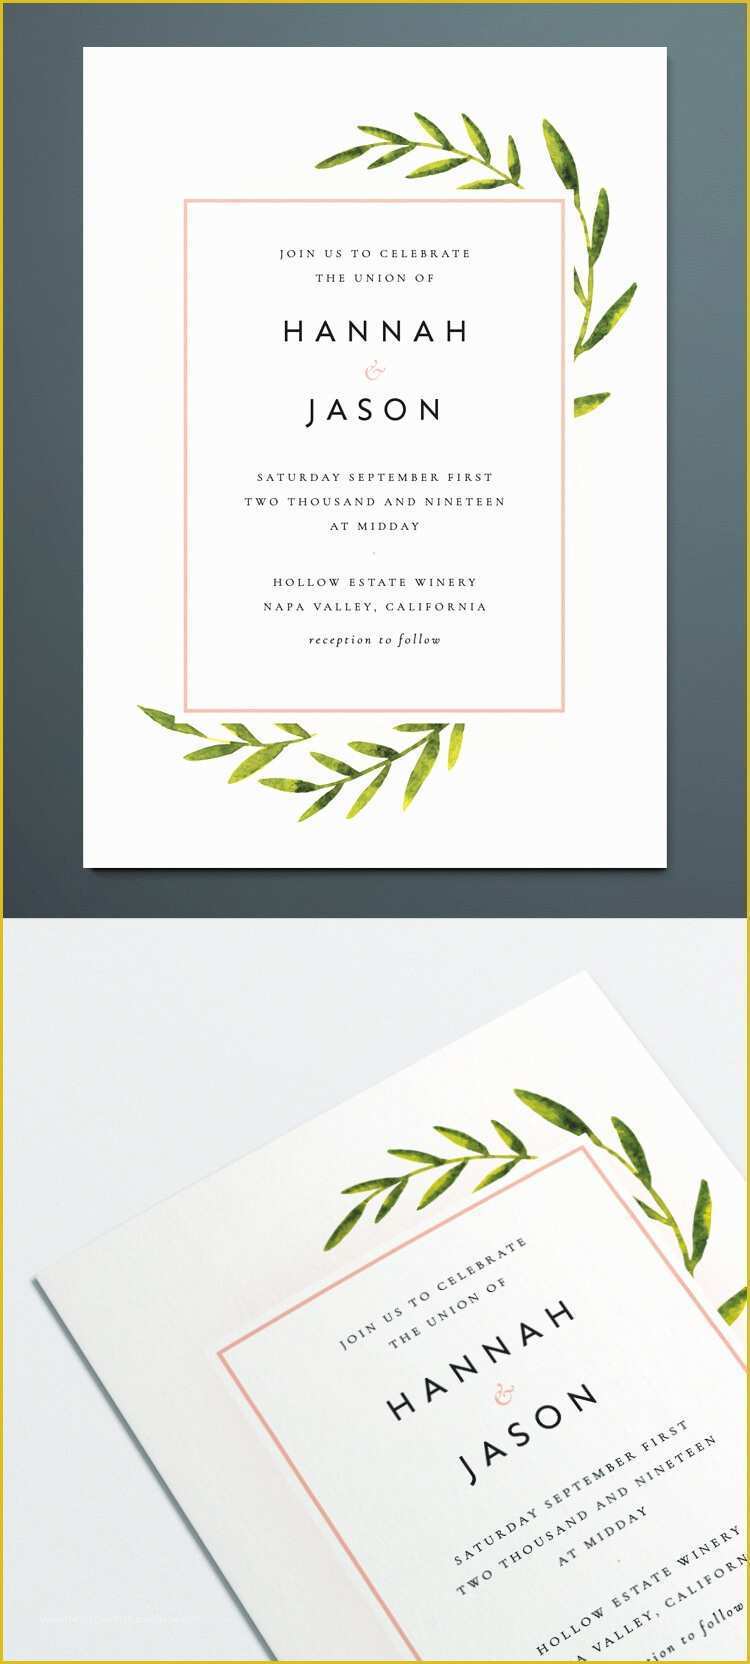 Indesign Invitation Template Free Of Vintage Business Card Template for Indesign